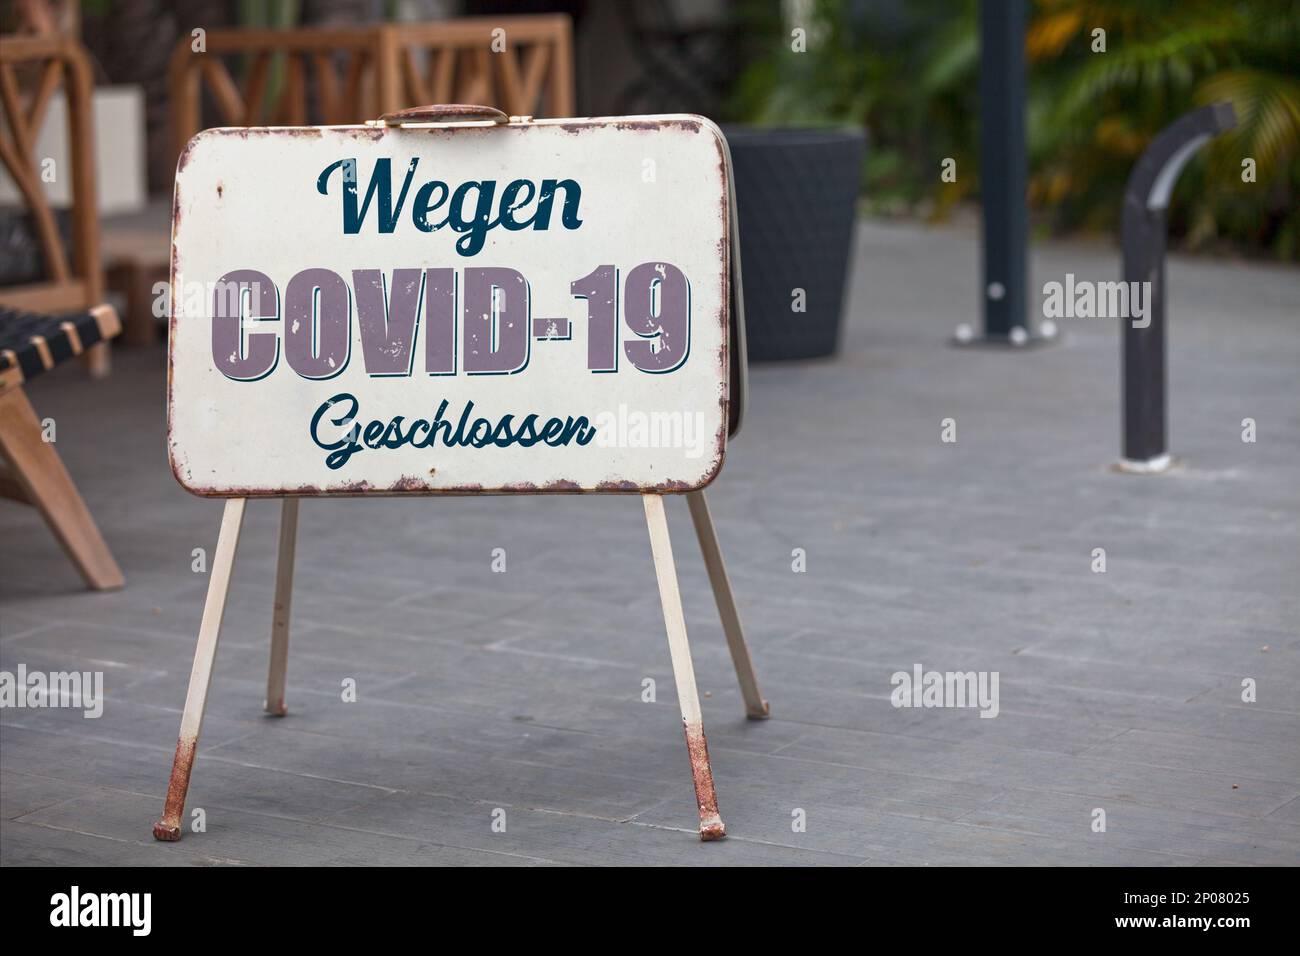 Outdoor open sign with written in it in German 'Wegen COVID-19 Geschlossen' meaning in English 'Closed due to COVID-19'. Stock Photo